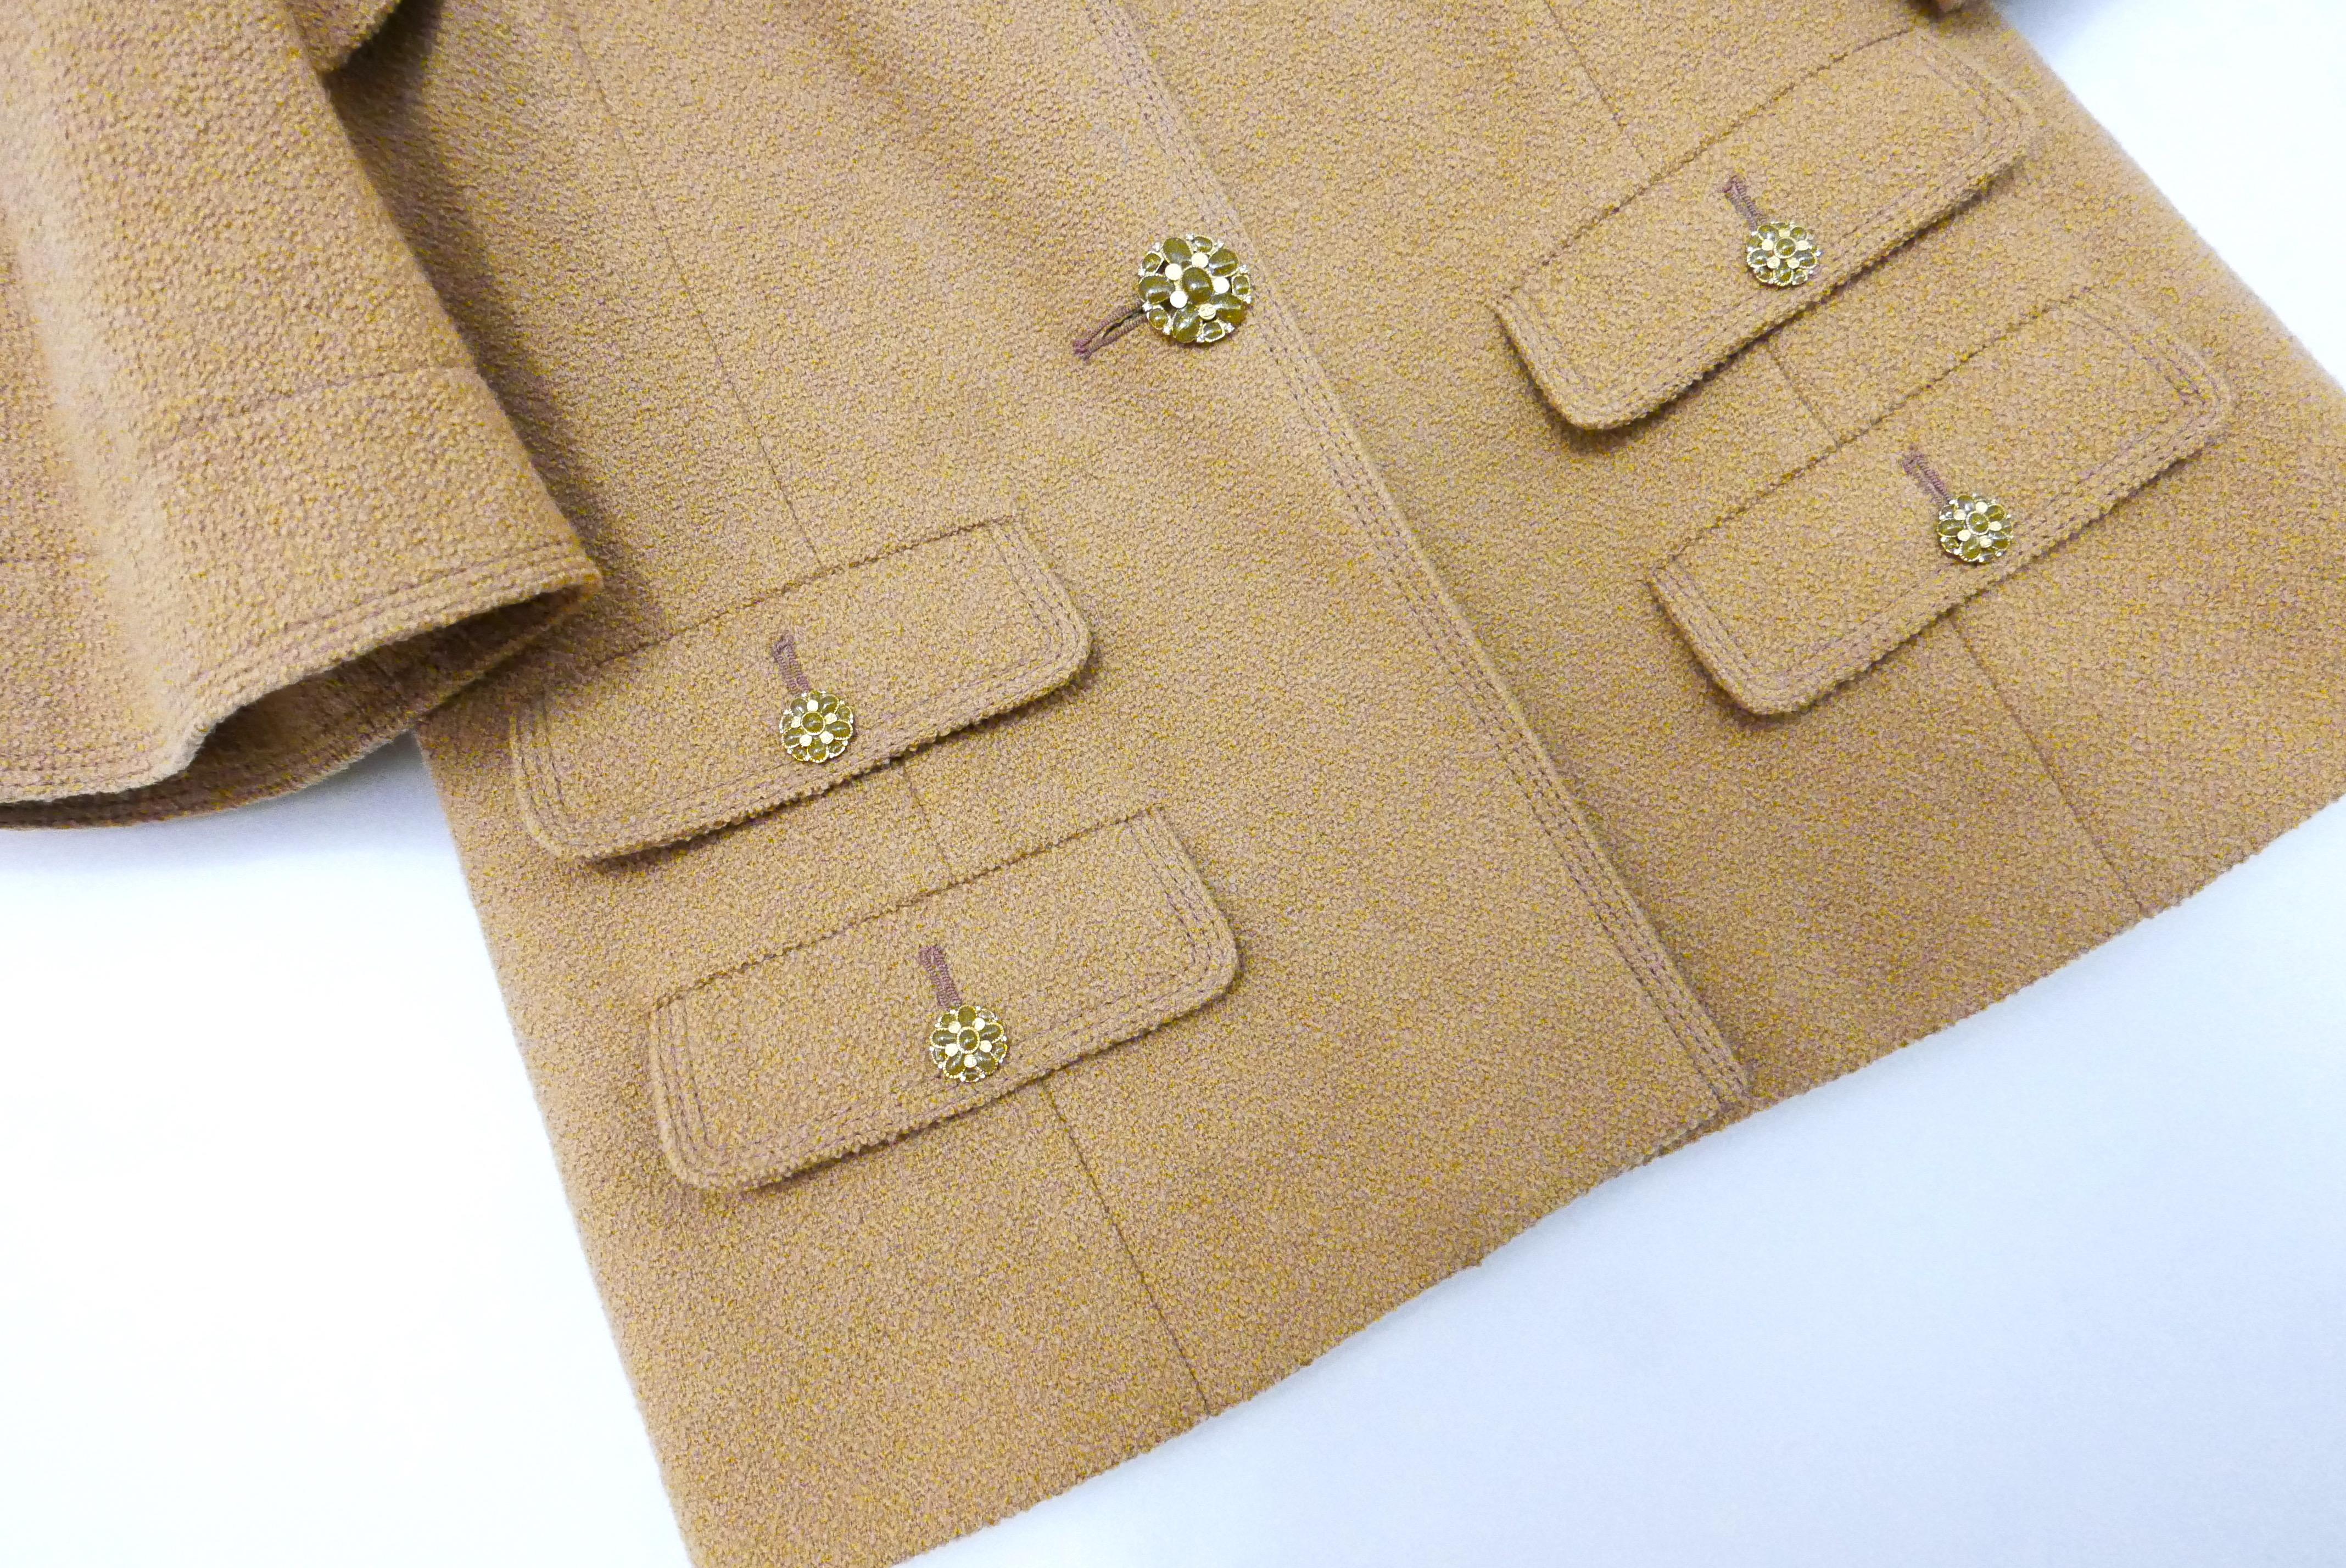 Stunning Chanel jacket from the Resort 2015 collection. Worn once and then carefully stored.

Made from boucle textured camel coloured wool with stunning glass gripoix buttons. It has 4 front pockets, wide sleeves and cape attachment to shoulders.